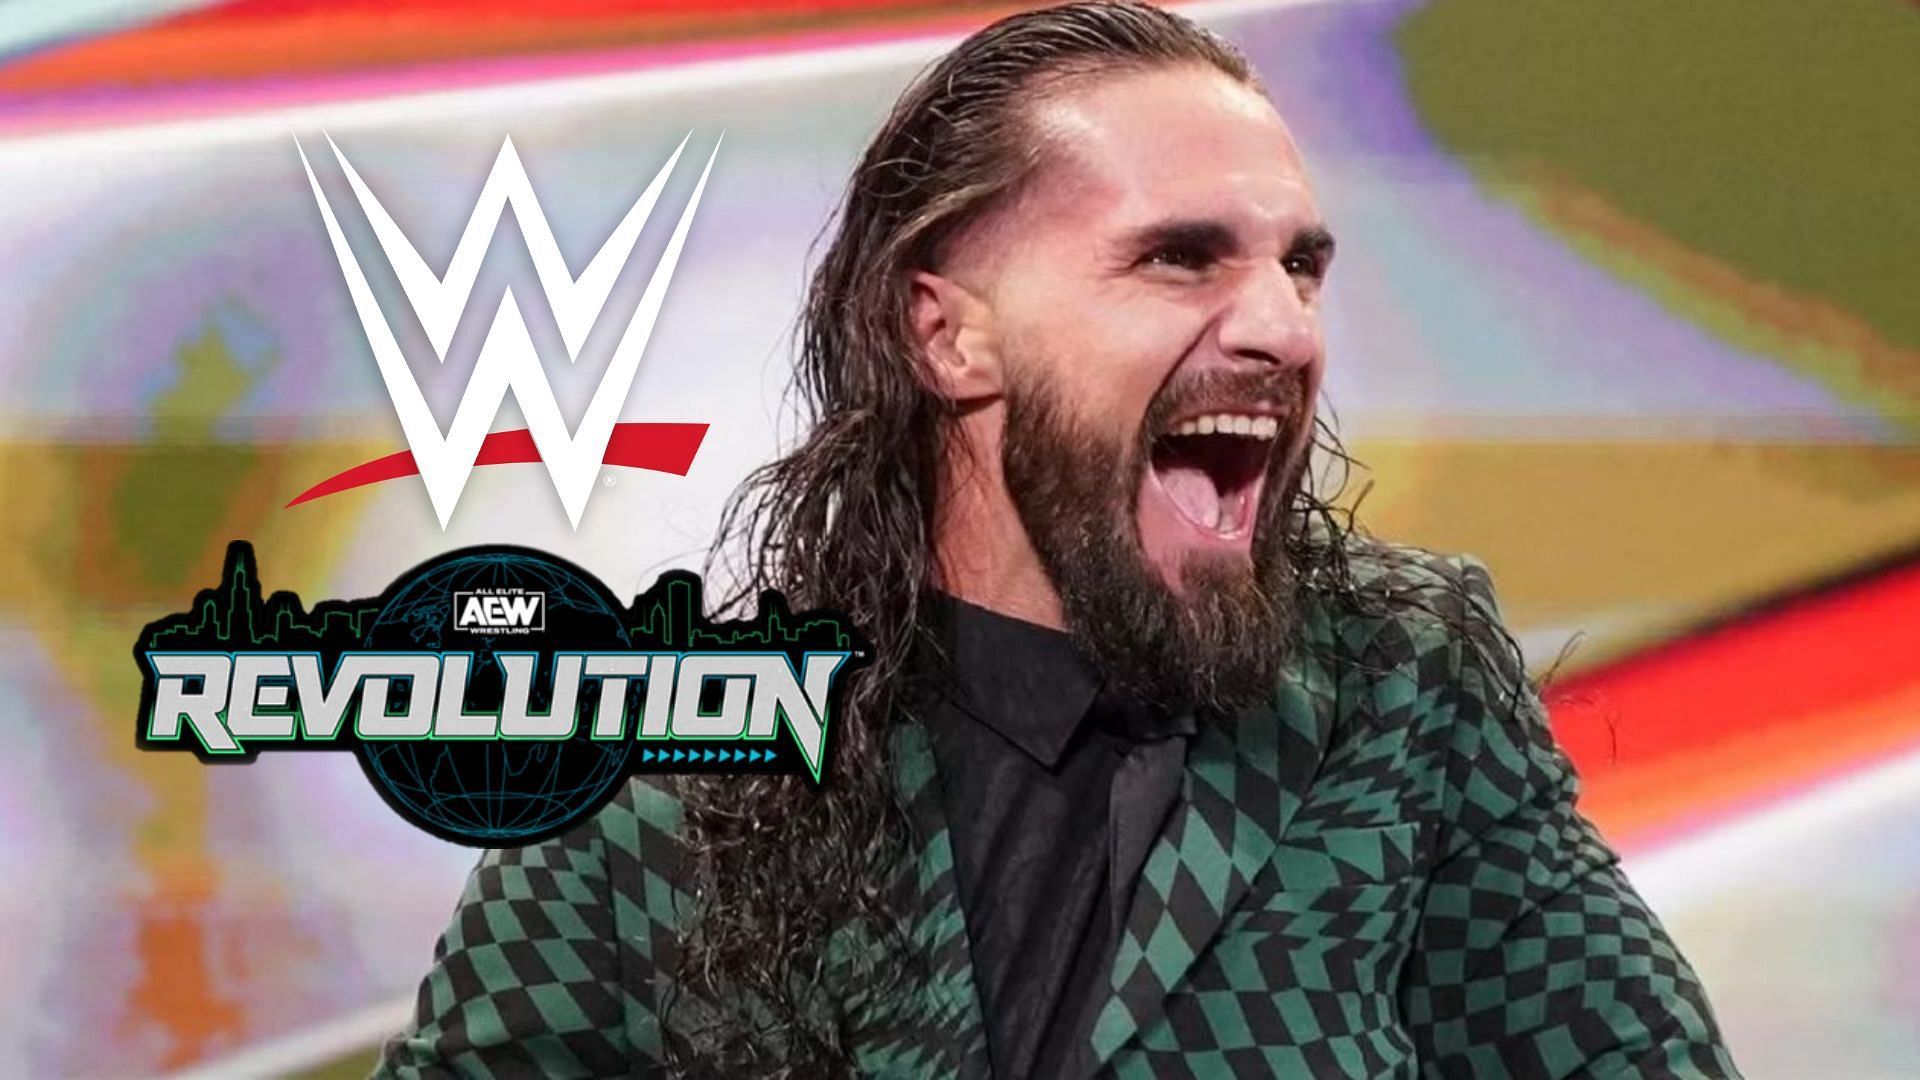 Three WWE stars were referenced at AEW Revolution 2023